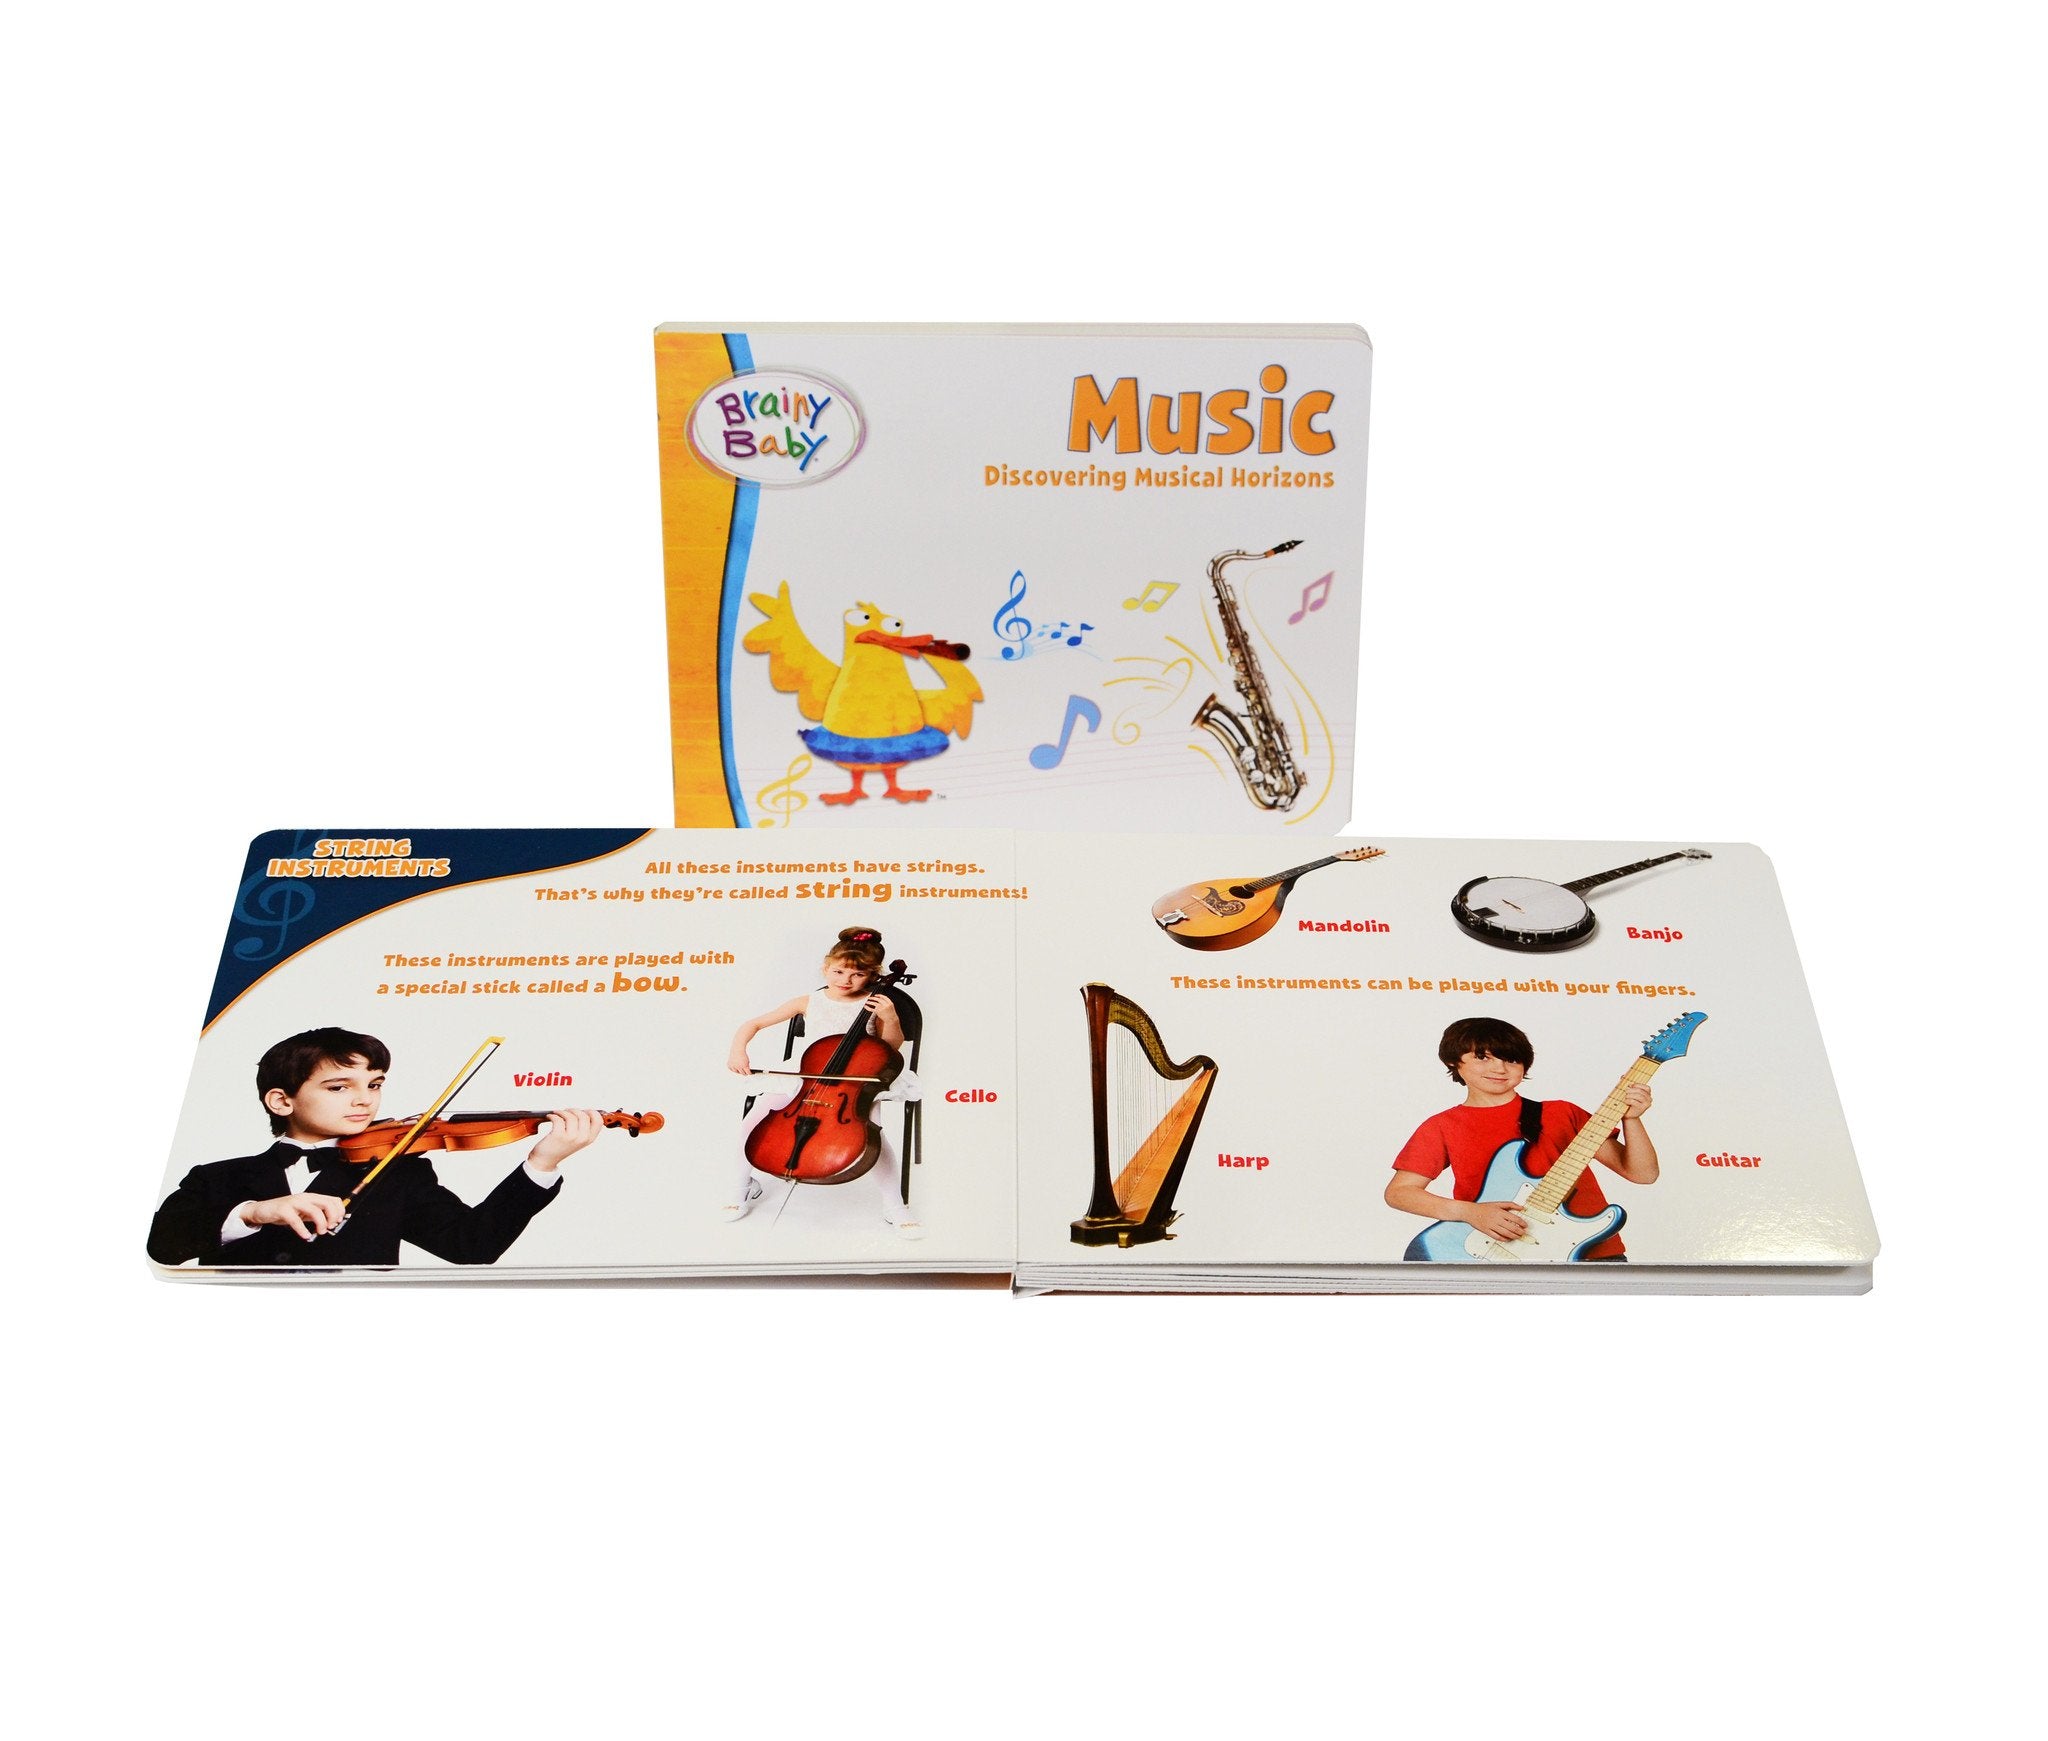 Brainy Baby® Discovering Musical Horizons Board Book, Flashcards & DVD Collection for Preschool Children